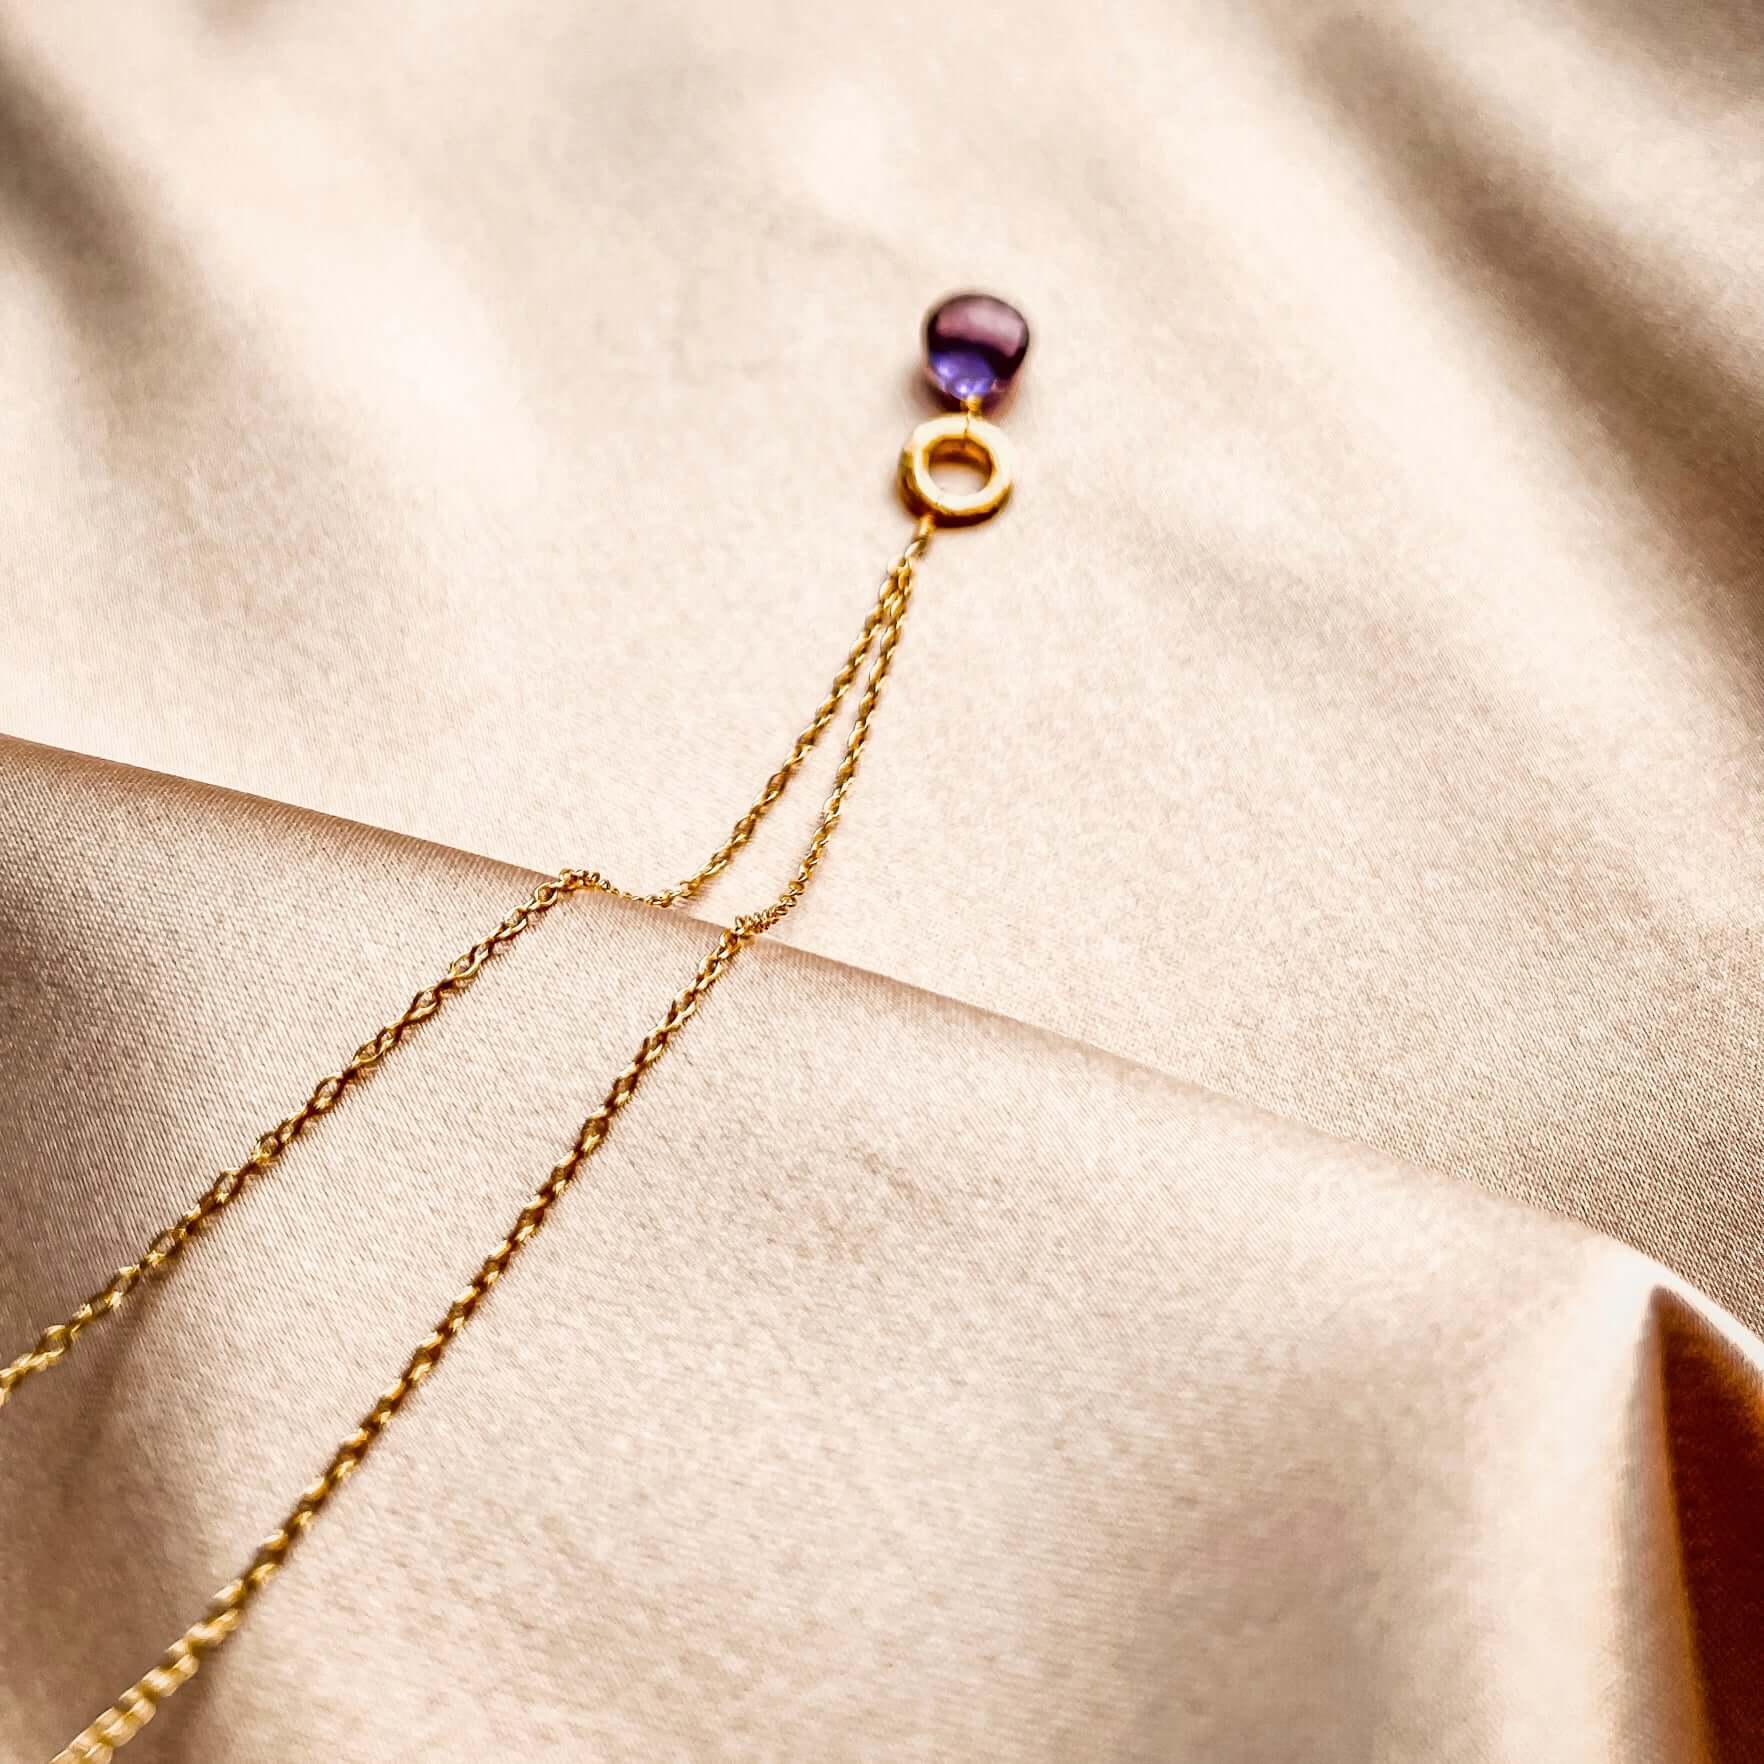 Layering chain with timeless amethyst gemstone. 14k gold plated .925 Italian silver, 16" length (extendable to 18"). Each stone unique, laid on a satin pink cloth.